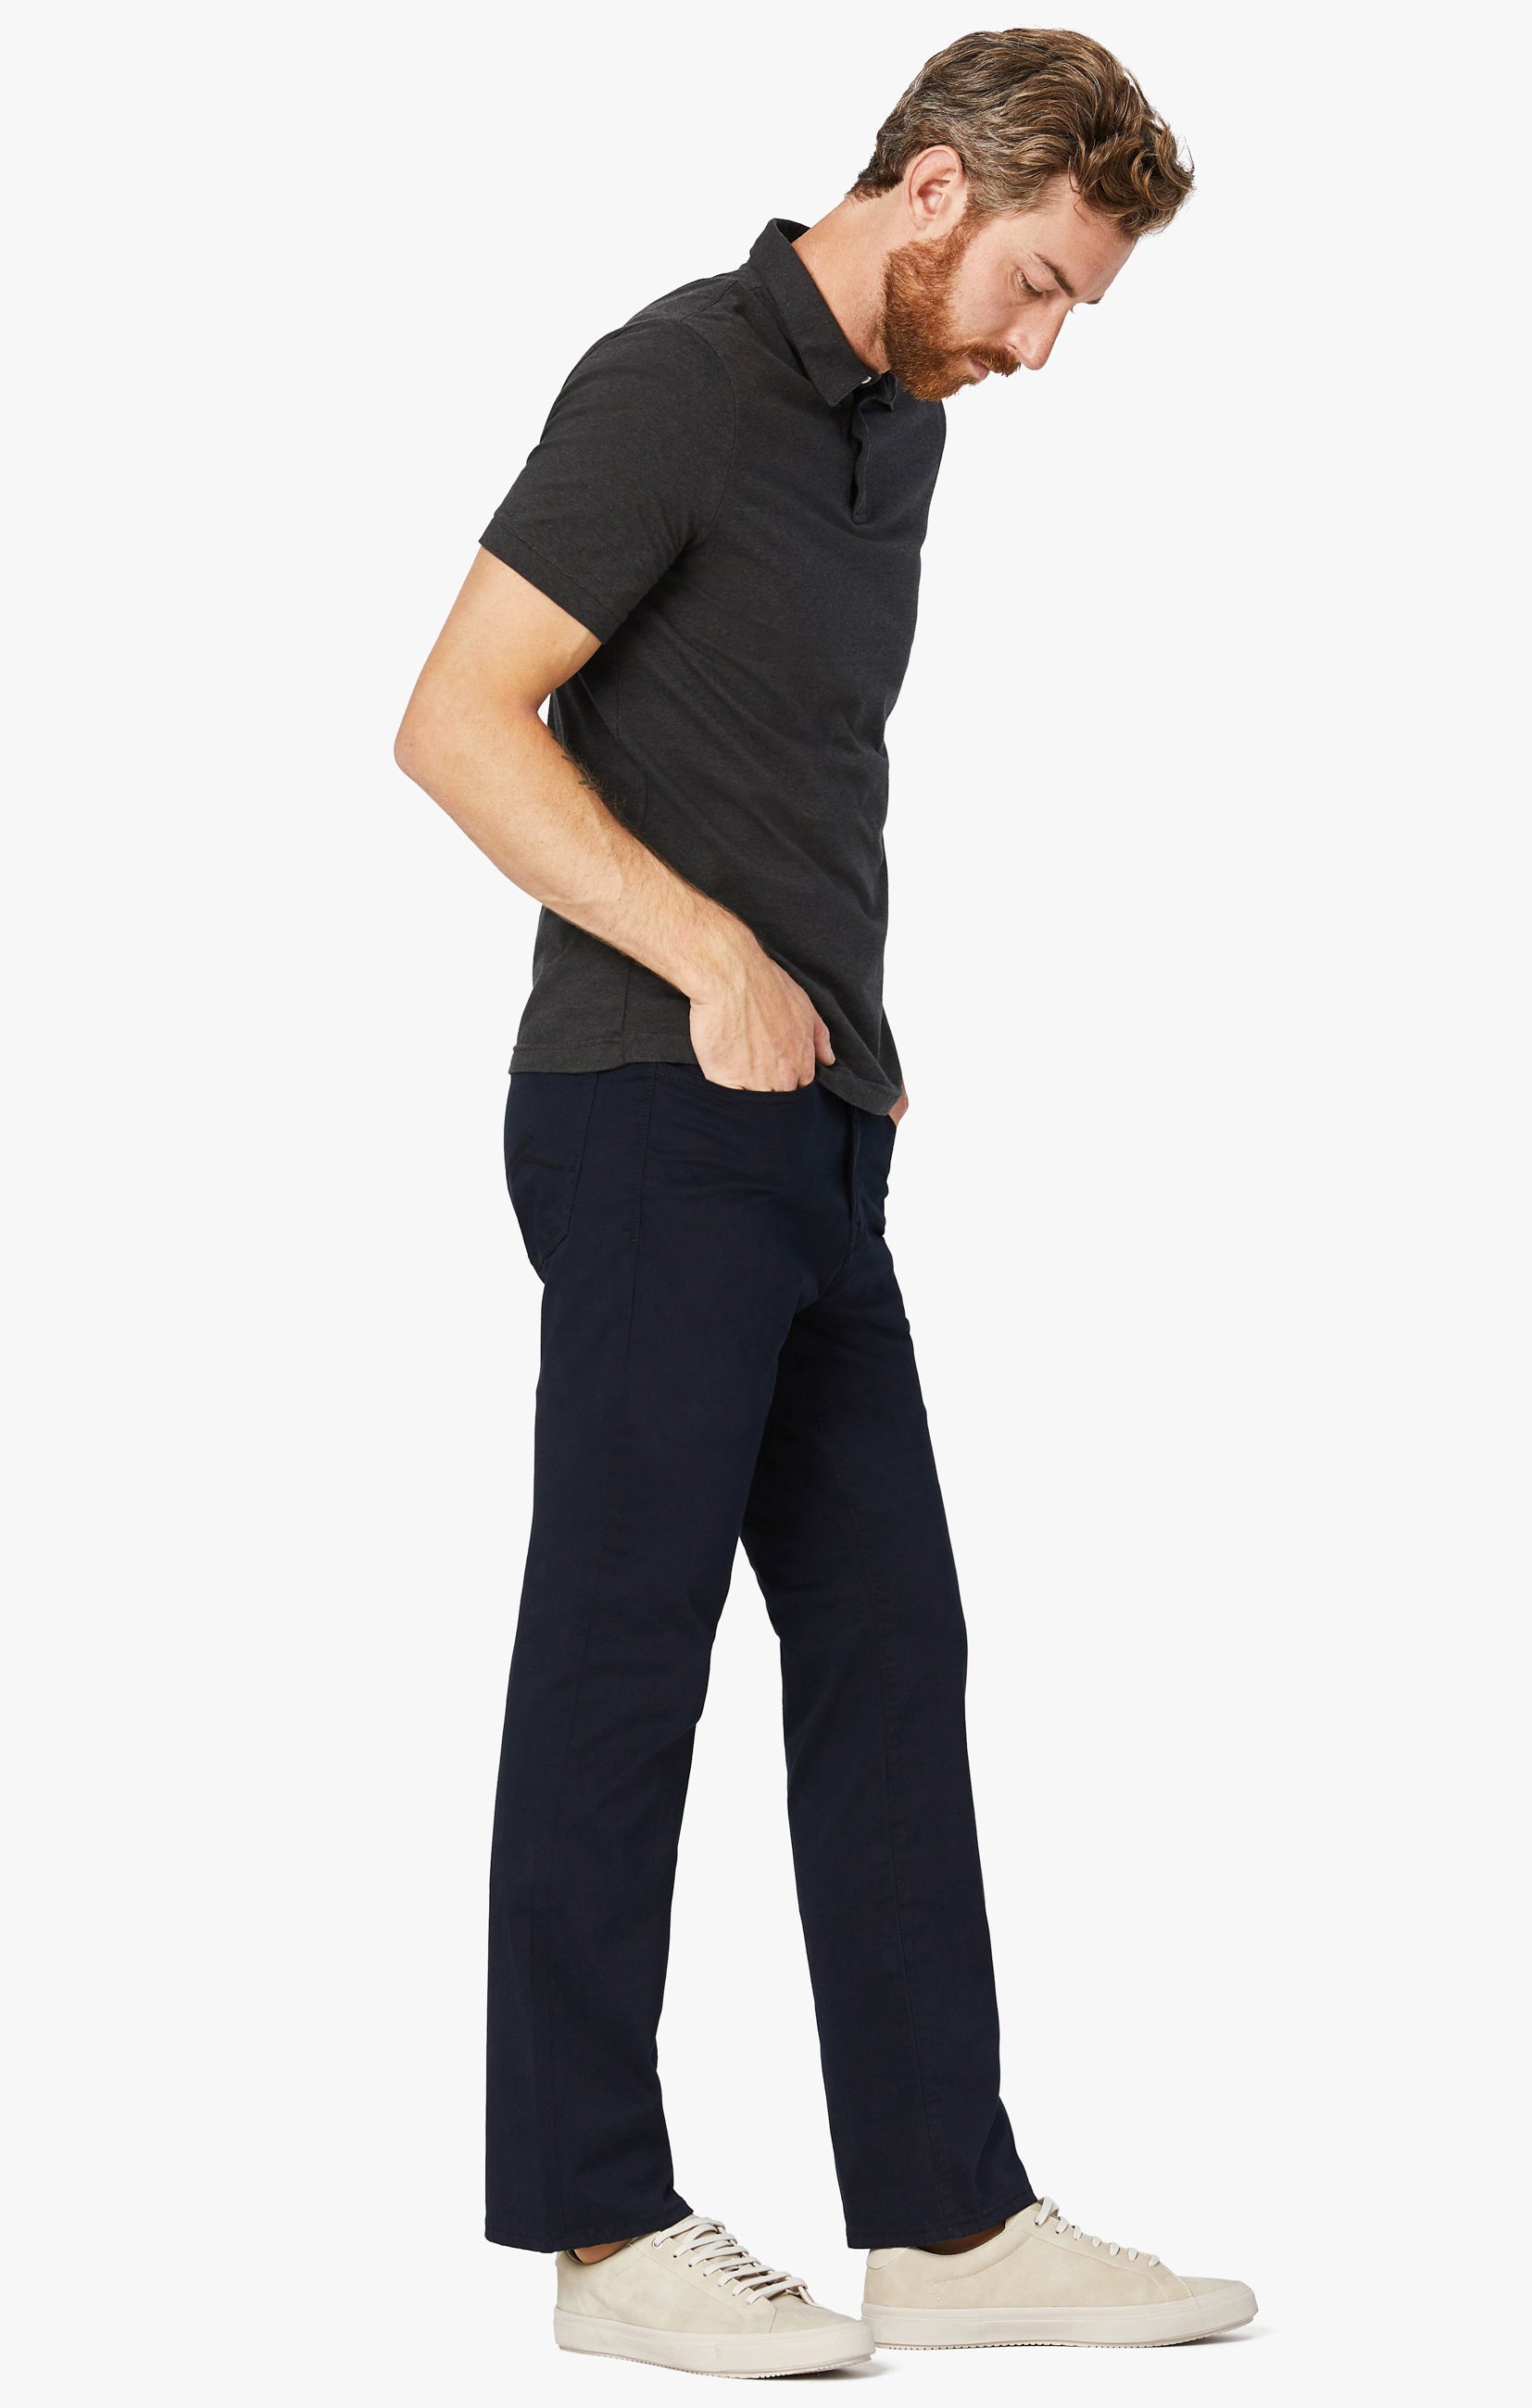 Charisma Relaxed Straight Pants in Navy Twill Image 10